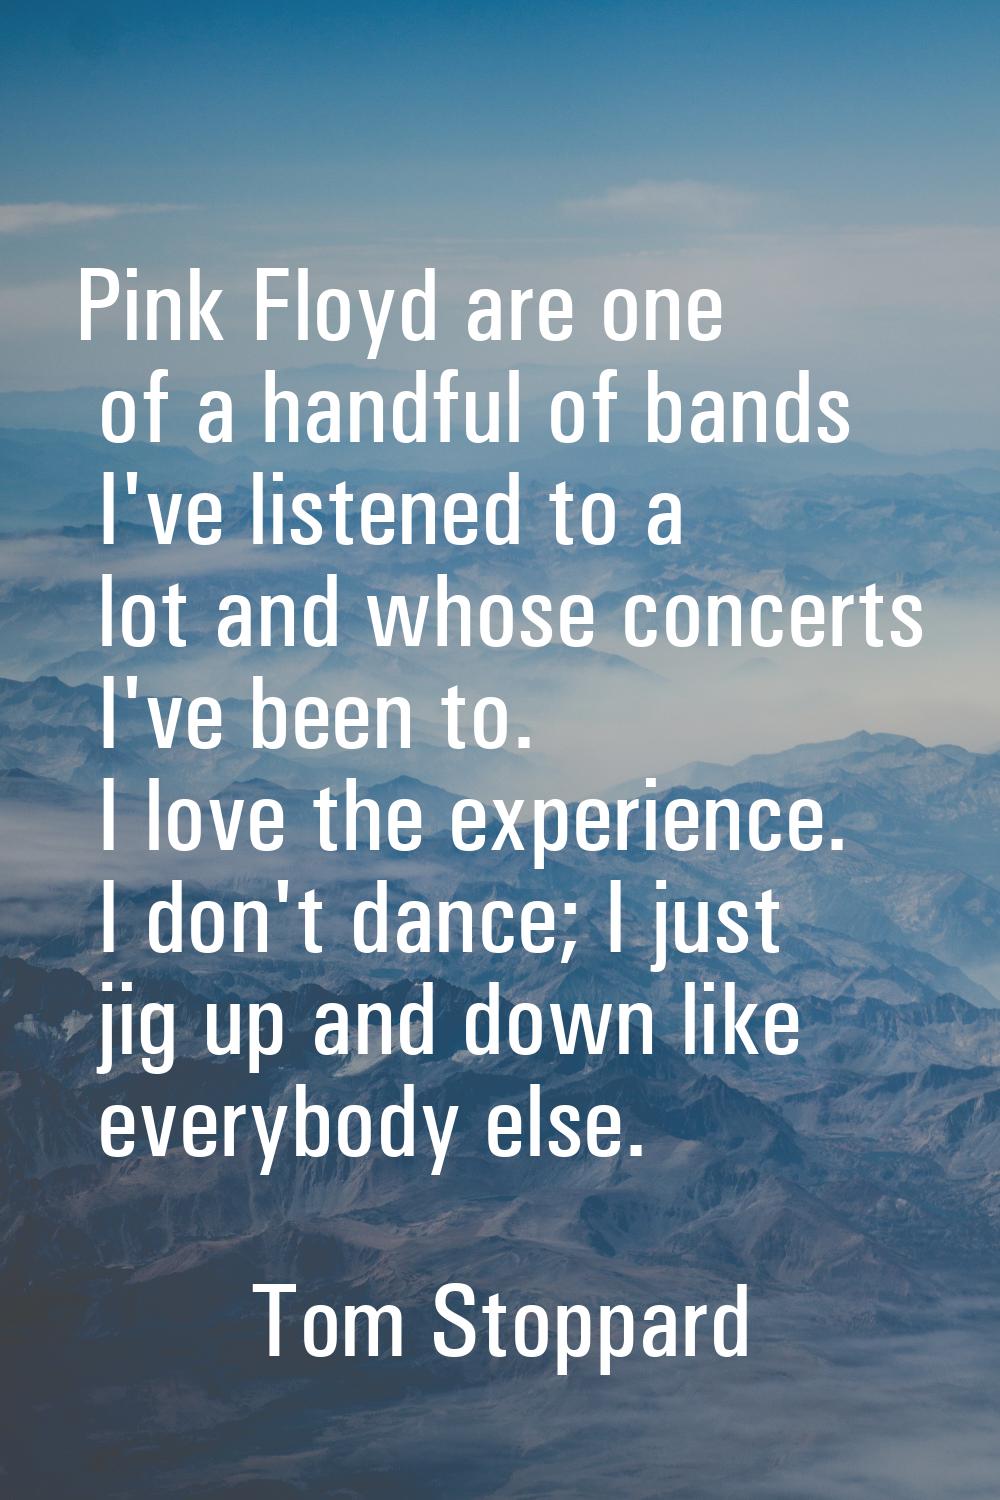 Pink Floyd are one of a handful of bands I've listened to a lot and whose concerts I've been to. I 